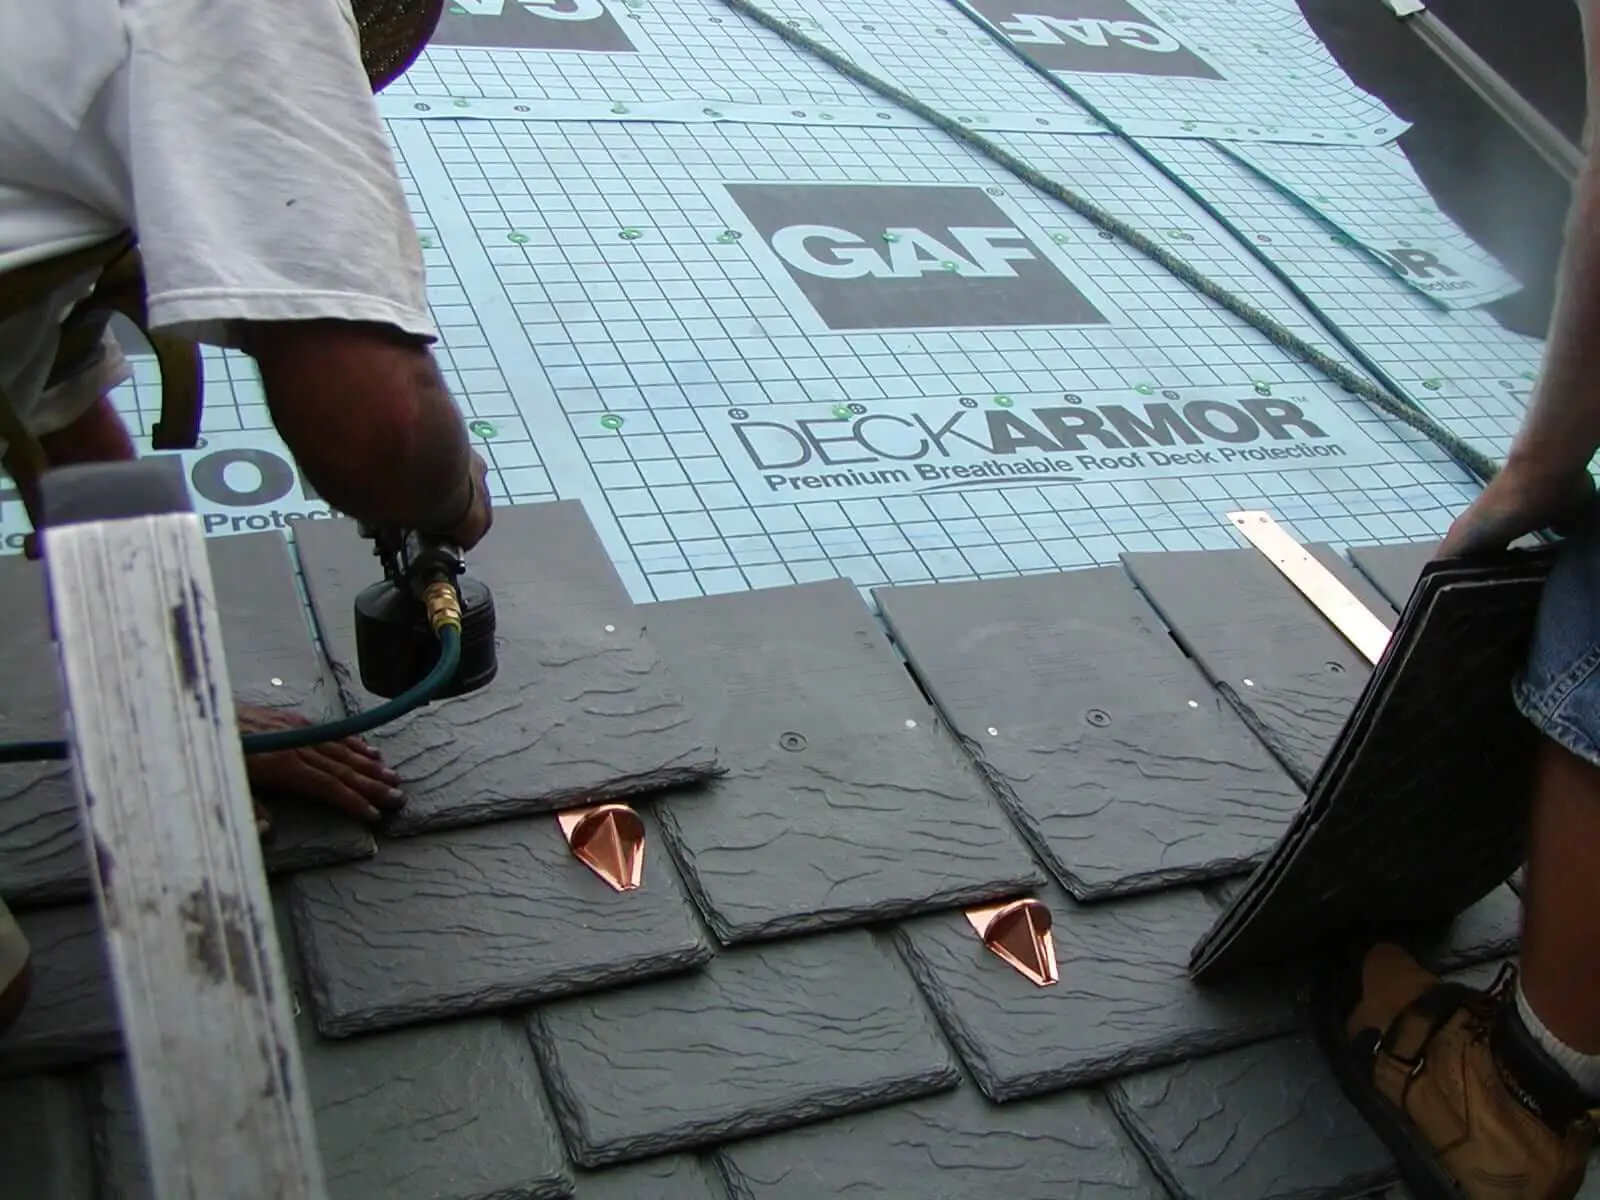 Concrete Tile Roofs Require Double Flashing